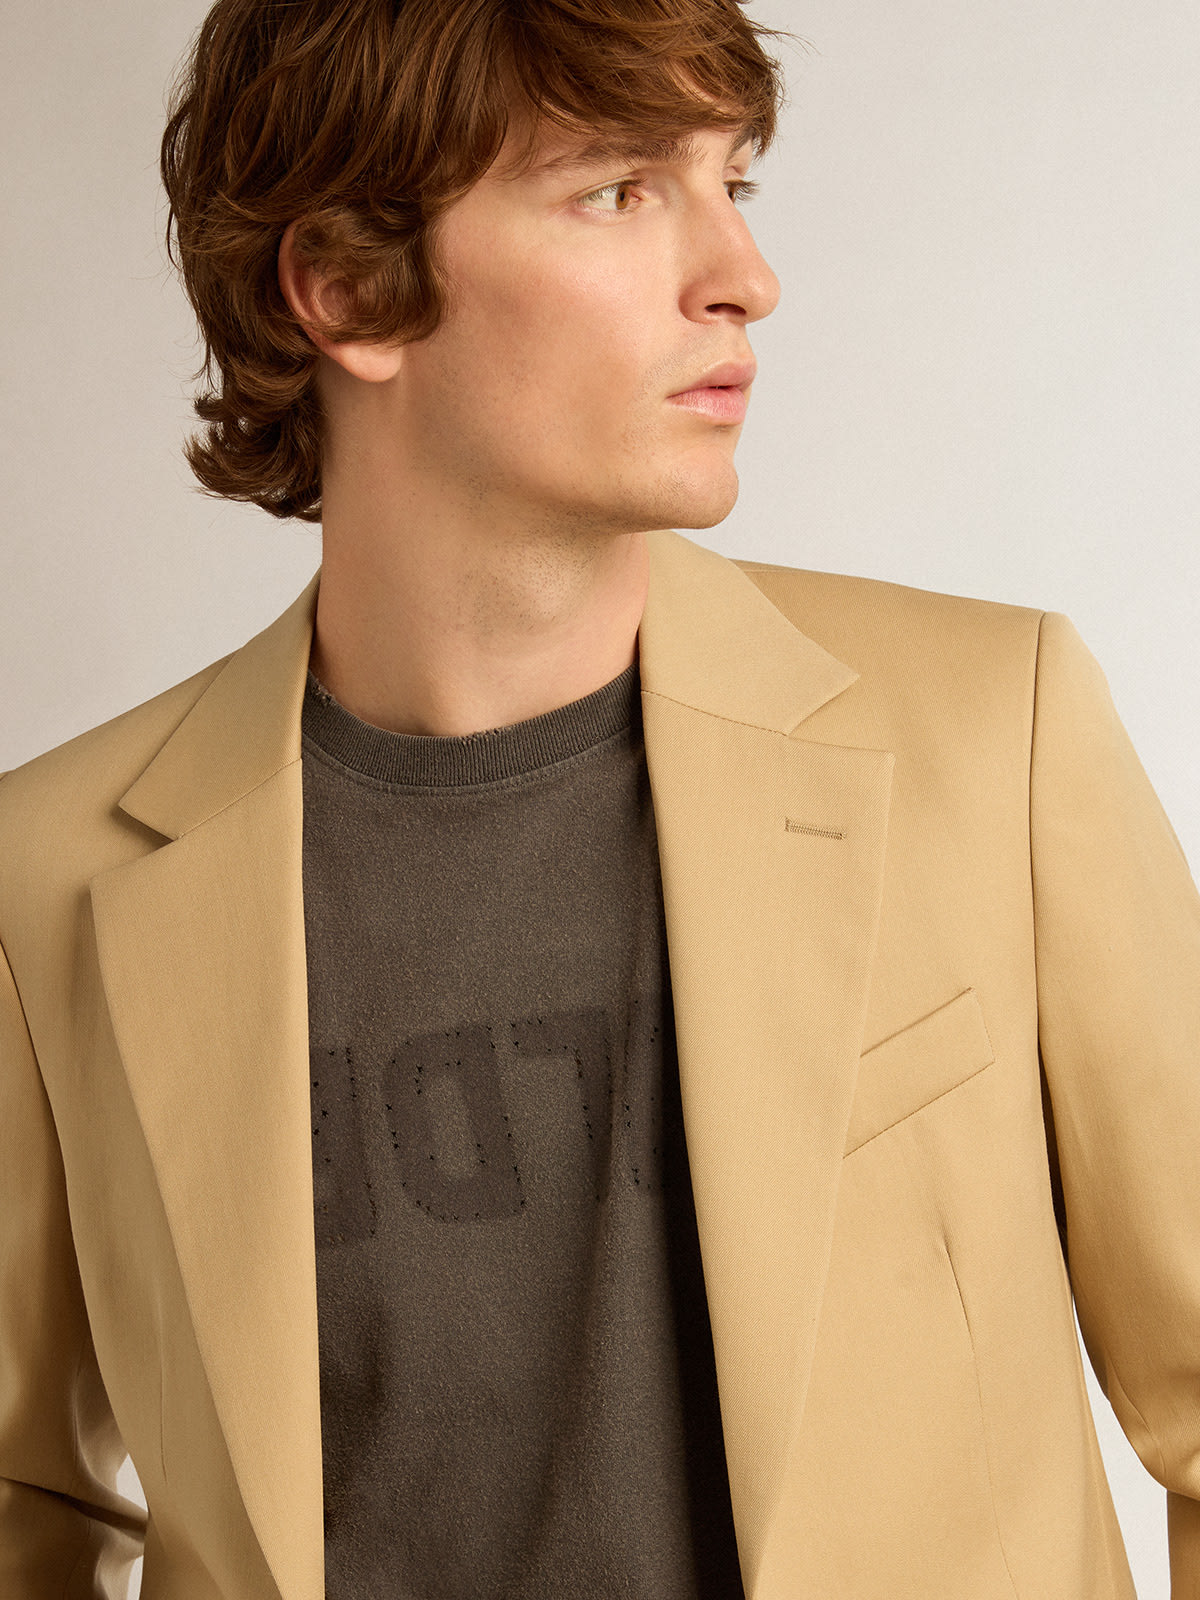 Golden Goose - Single-breasted blazer in sand with horn buttons in 